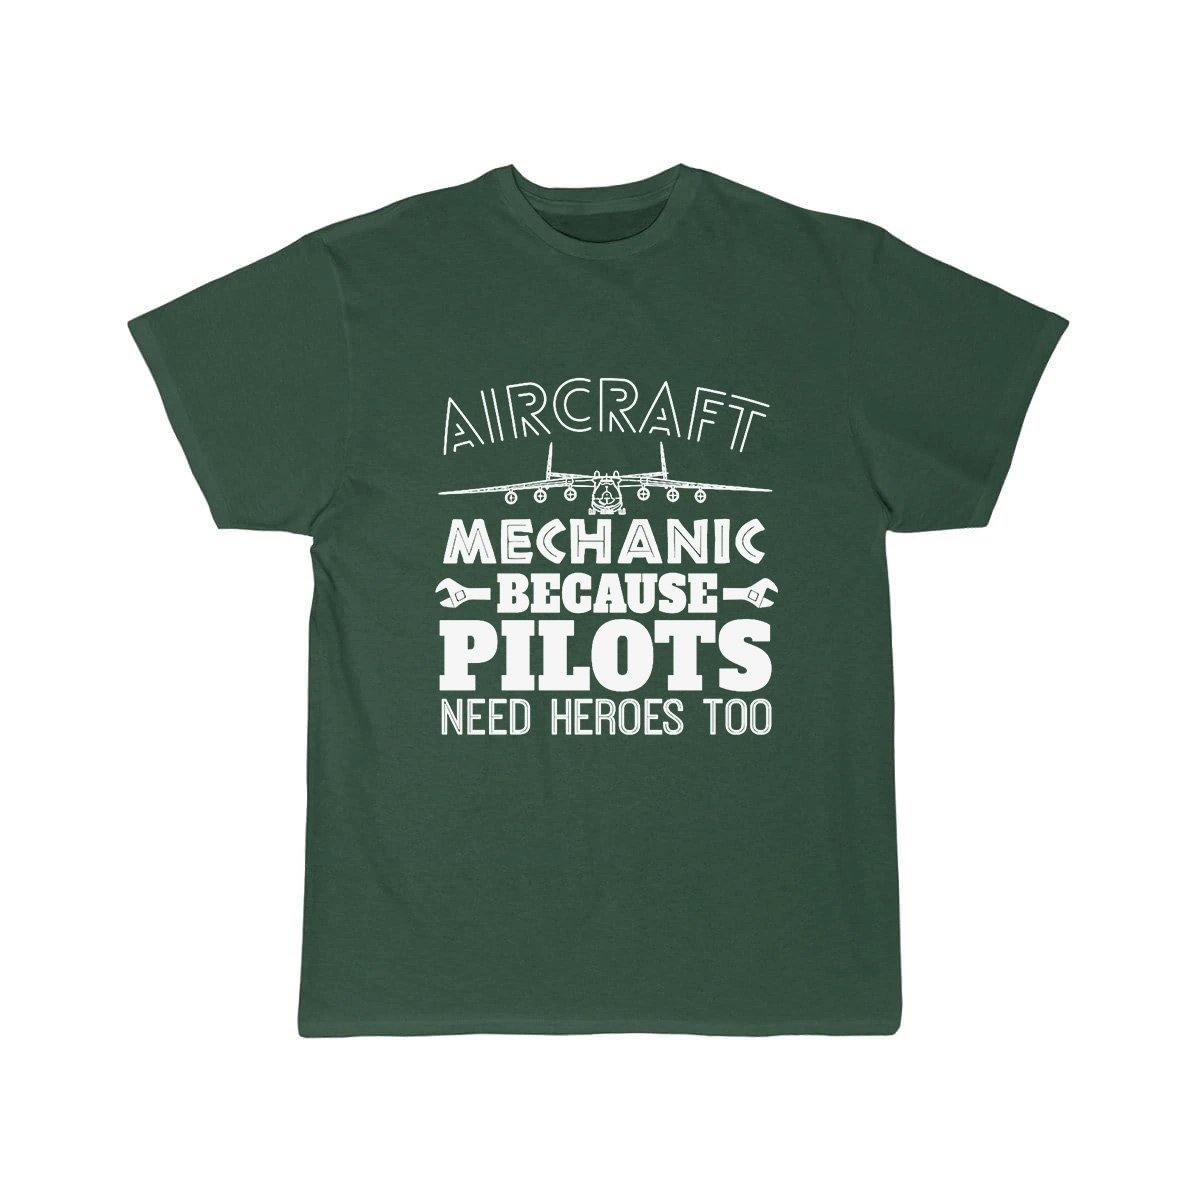 AIRCRAFT MECHANIC BECAUSE PILOTS NEED HROES TOO T SHIRT THE AV8R